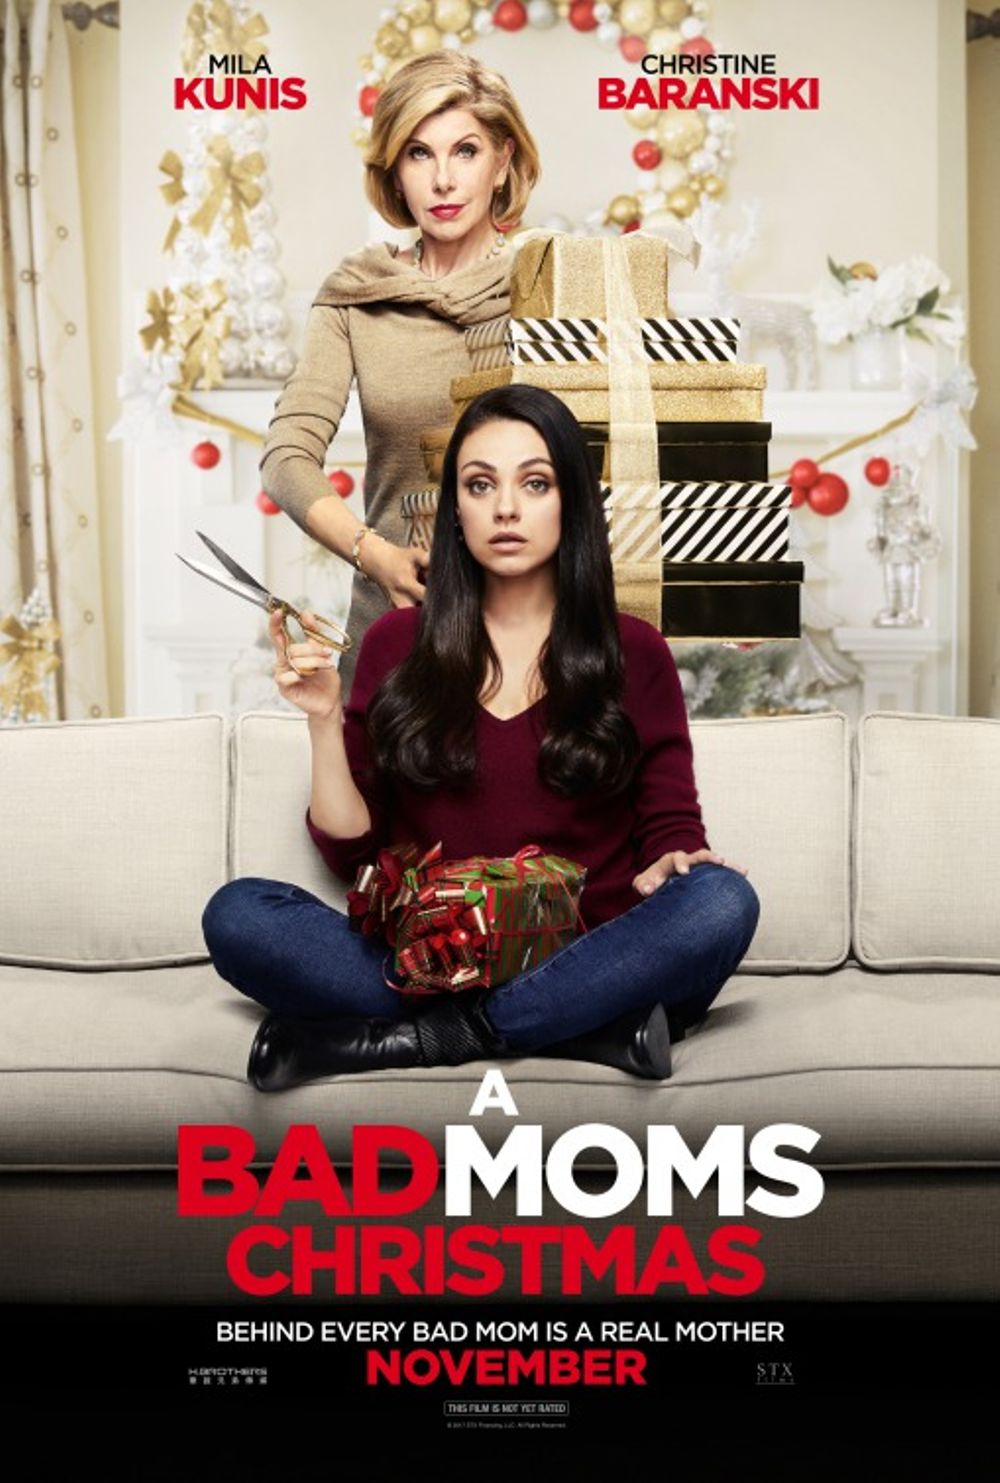 A Bad Moms Christmas Movie Review